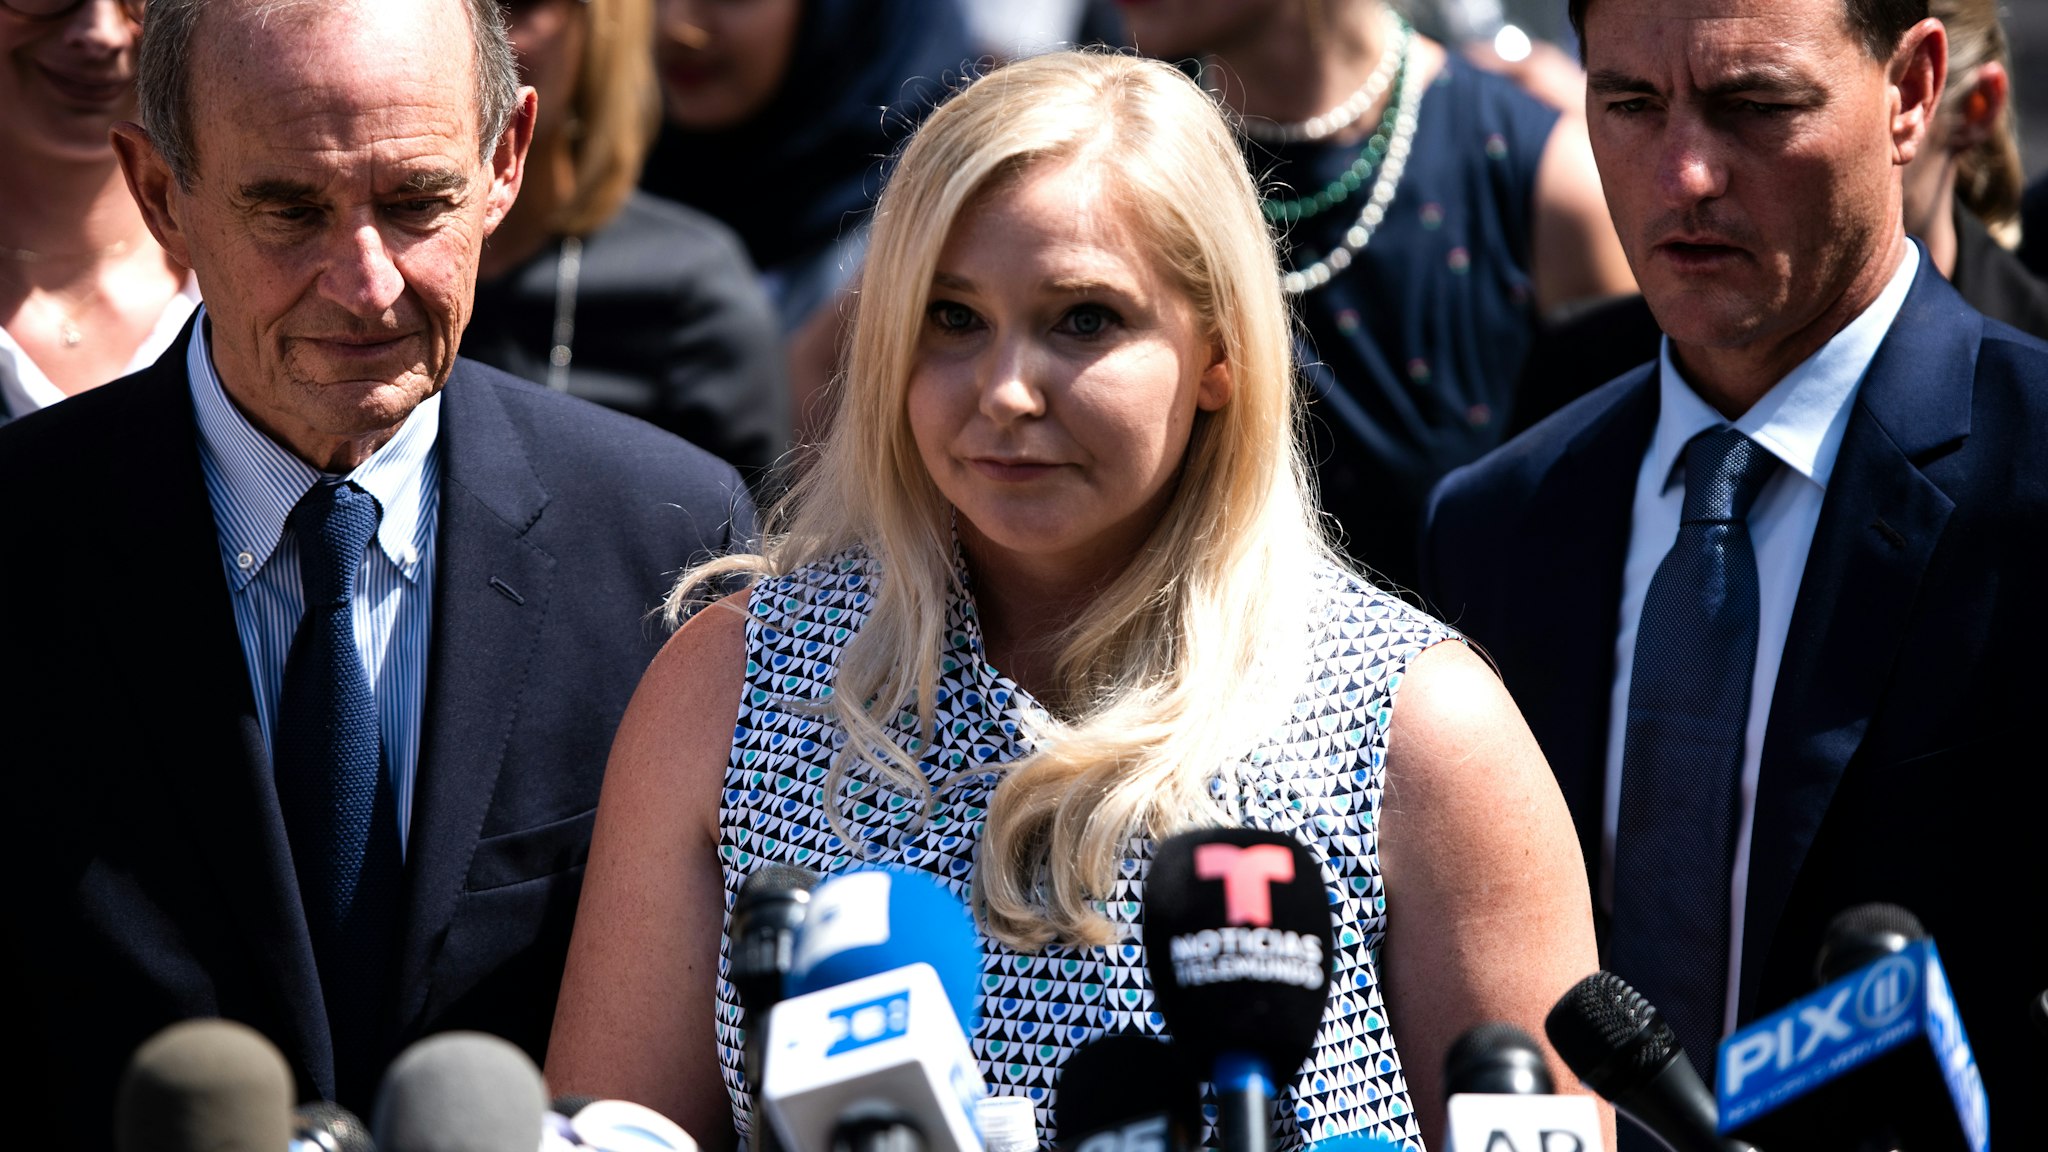 Virginia Giuffre, an alleged victim of Jeffrey Epstein, center, pauses while speaking with members of the media outside of federal court in New York, U.S., on Tuesday, Aug. 27, 2019. Epstein, a convicted pedophile, killed himself in prison earlier this month while awaiting trial on charges of conspiracy and trafficking minors for sex.